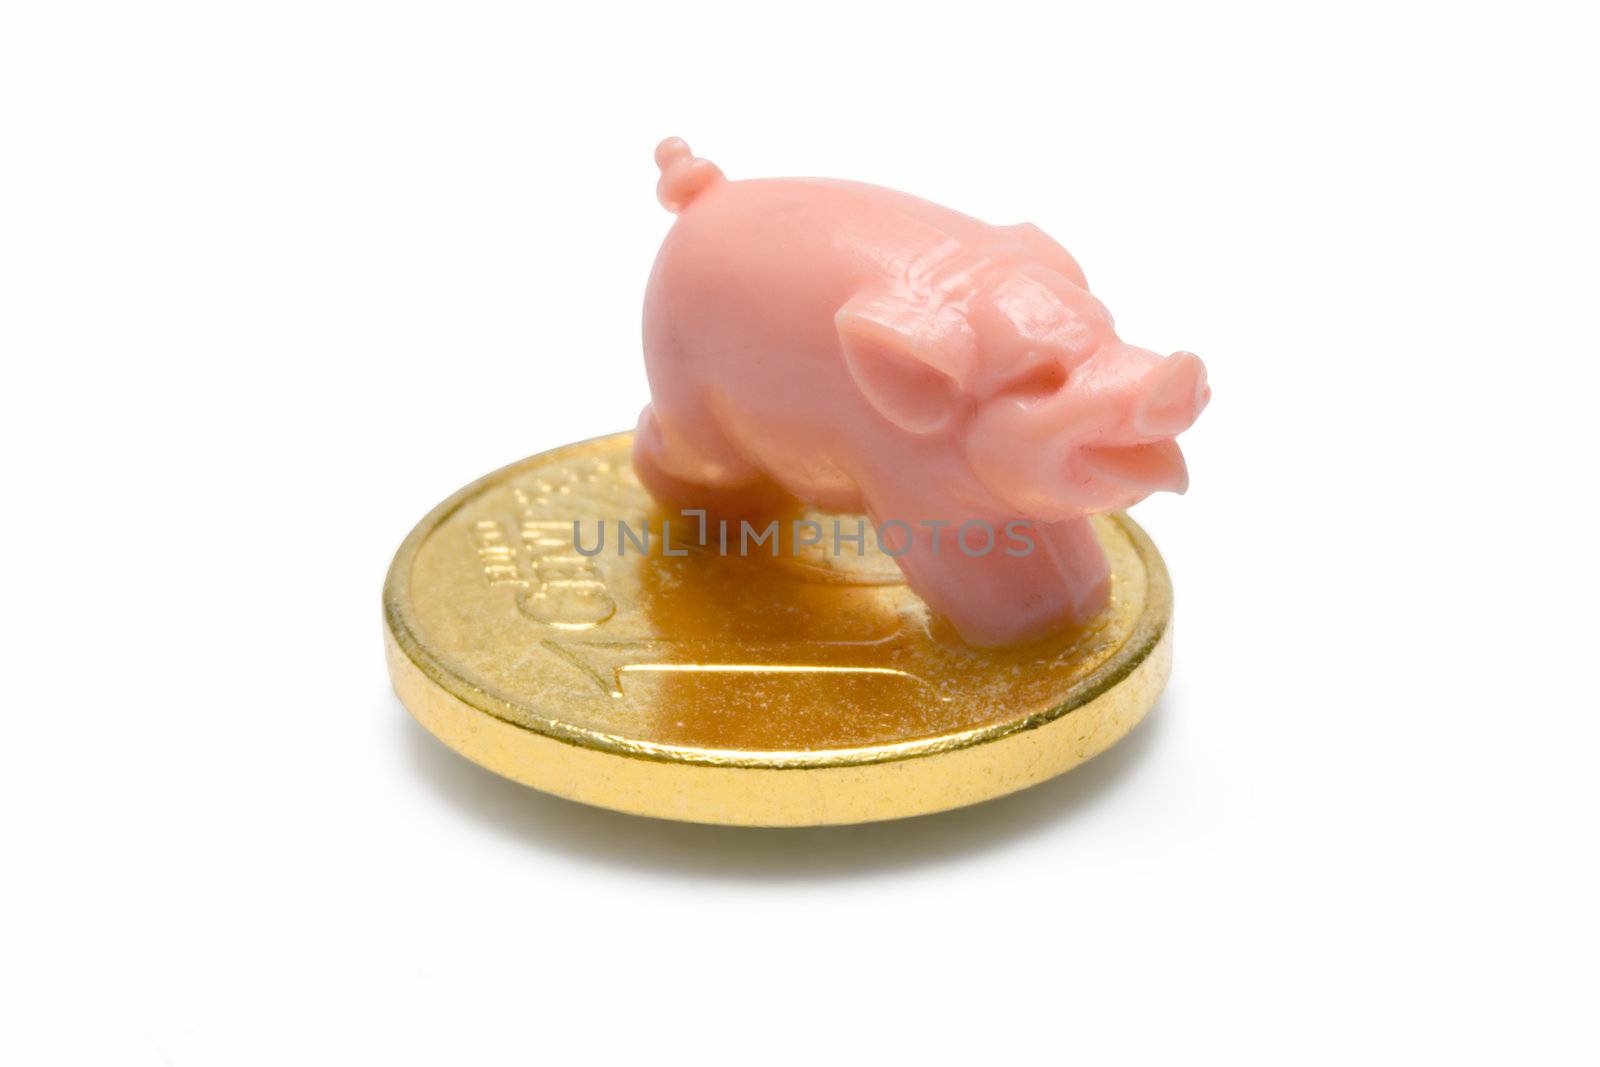 Small pig standing on a coin. Isolated on white.